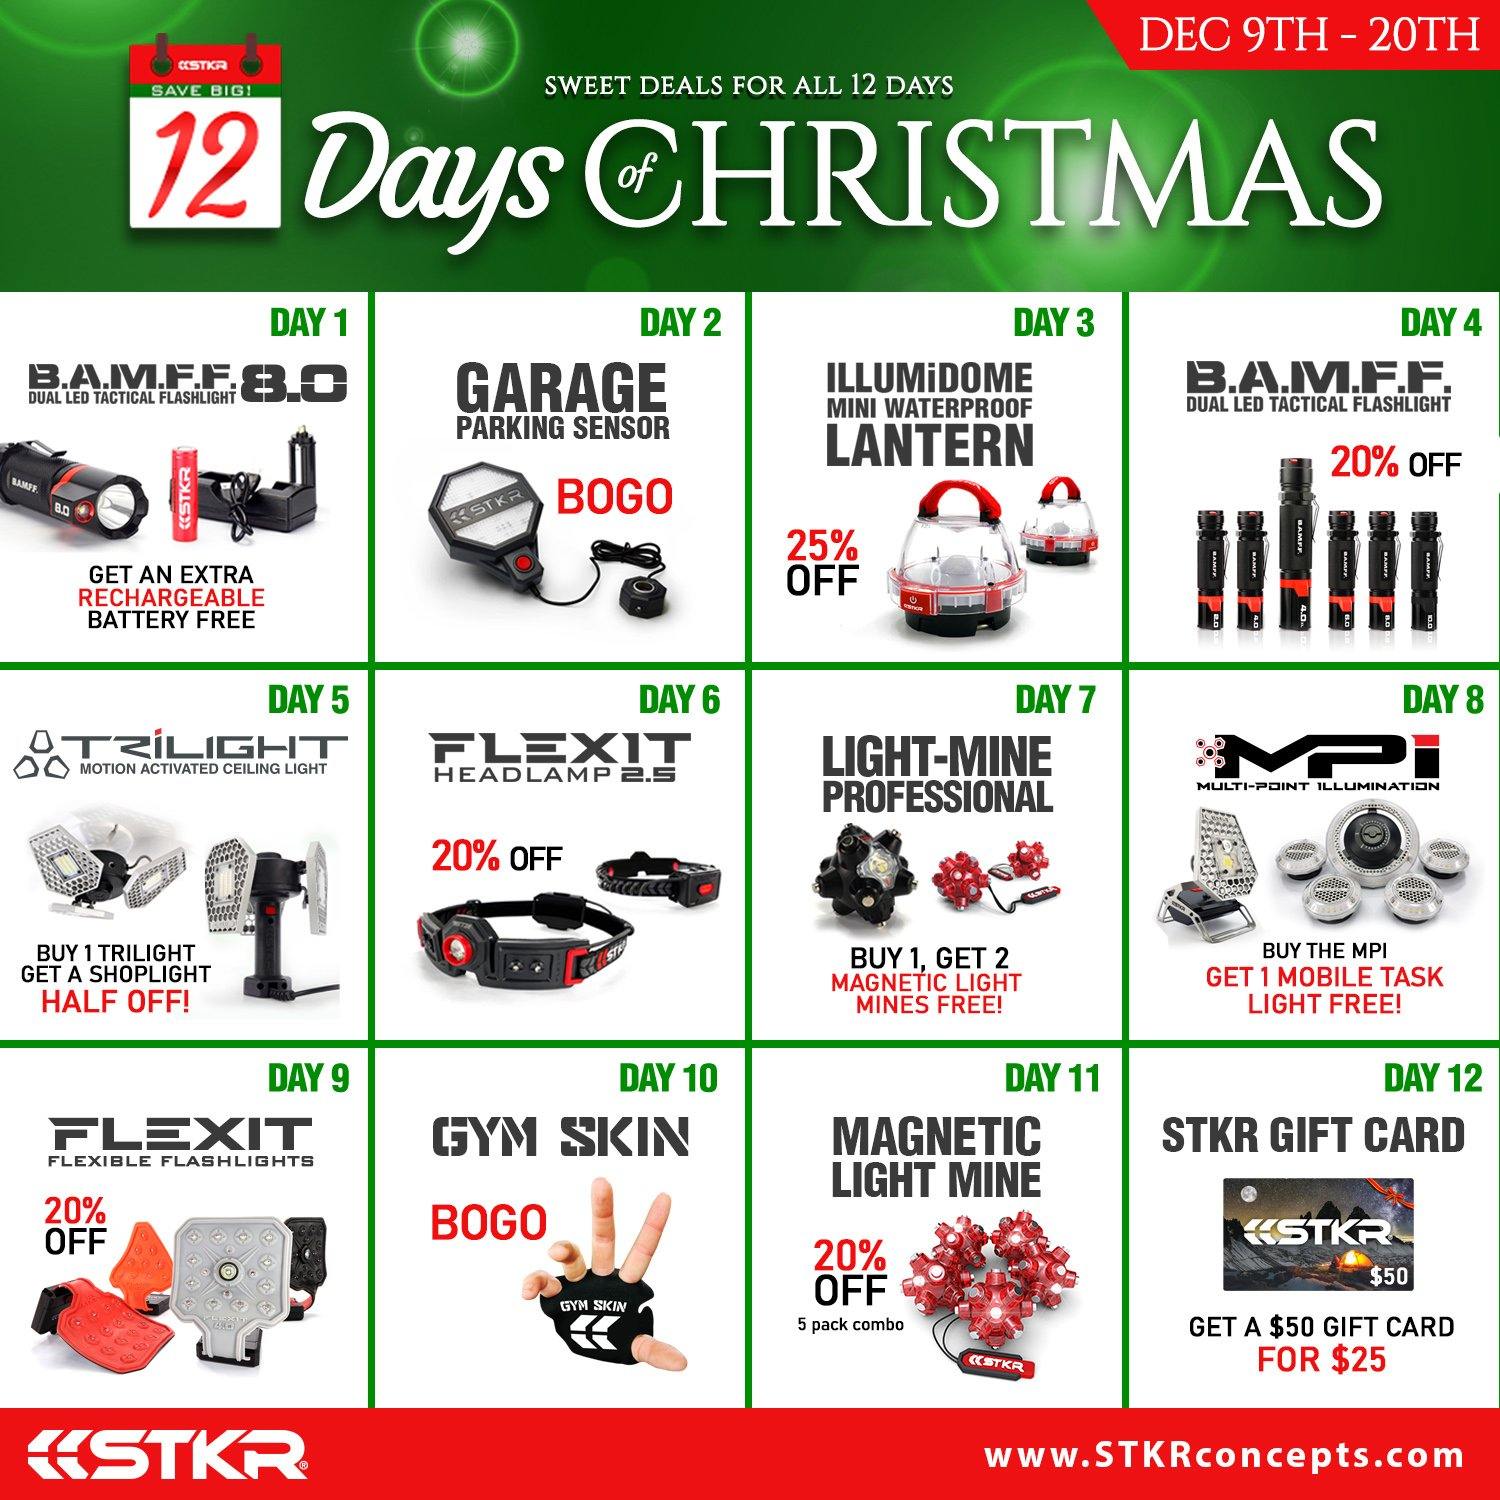 12 Days of Christmas **Everyday is a new deal! STKR Concepts